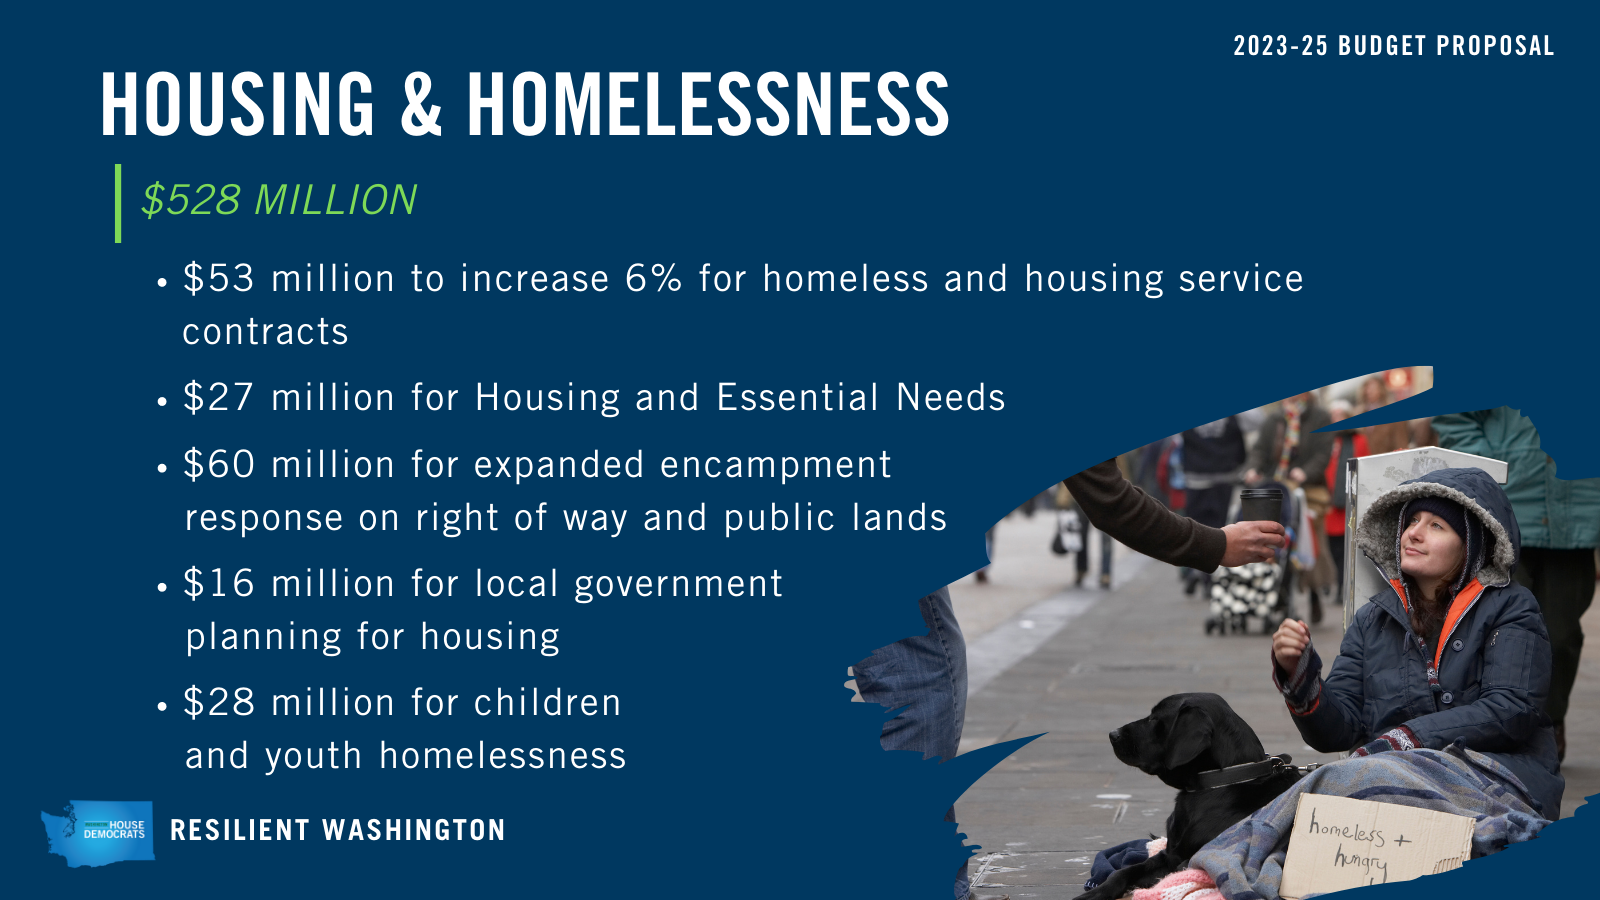 The 2023-25 House budget proposal, "Resilient Washington", includes $528 million dollars in funding for housing and homelessness. This includes $53 million to increase 6% for homeless and housing service contracts, $27 million for Housing and Essential Needs, $60 million for expanded encampment response on right of way and public lands, $16 million for local government planning for housing, and $28 million for children and youth homelessness.